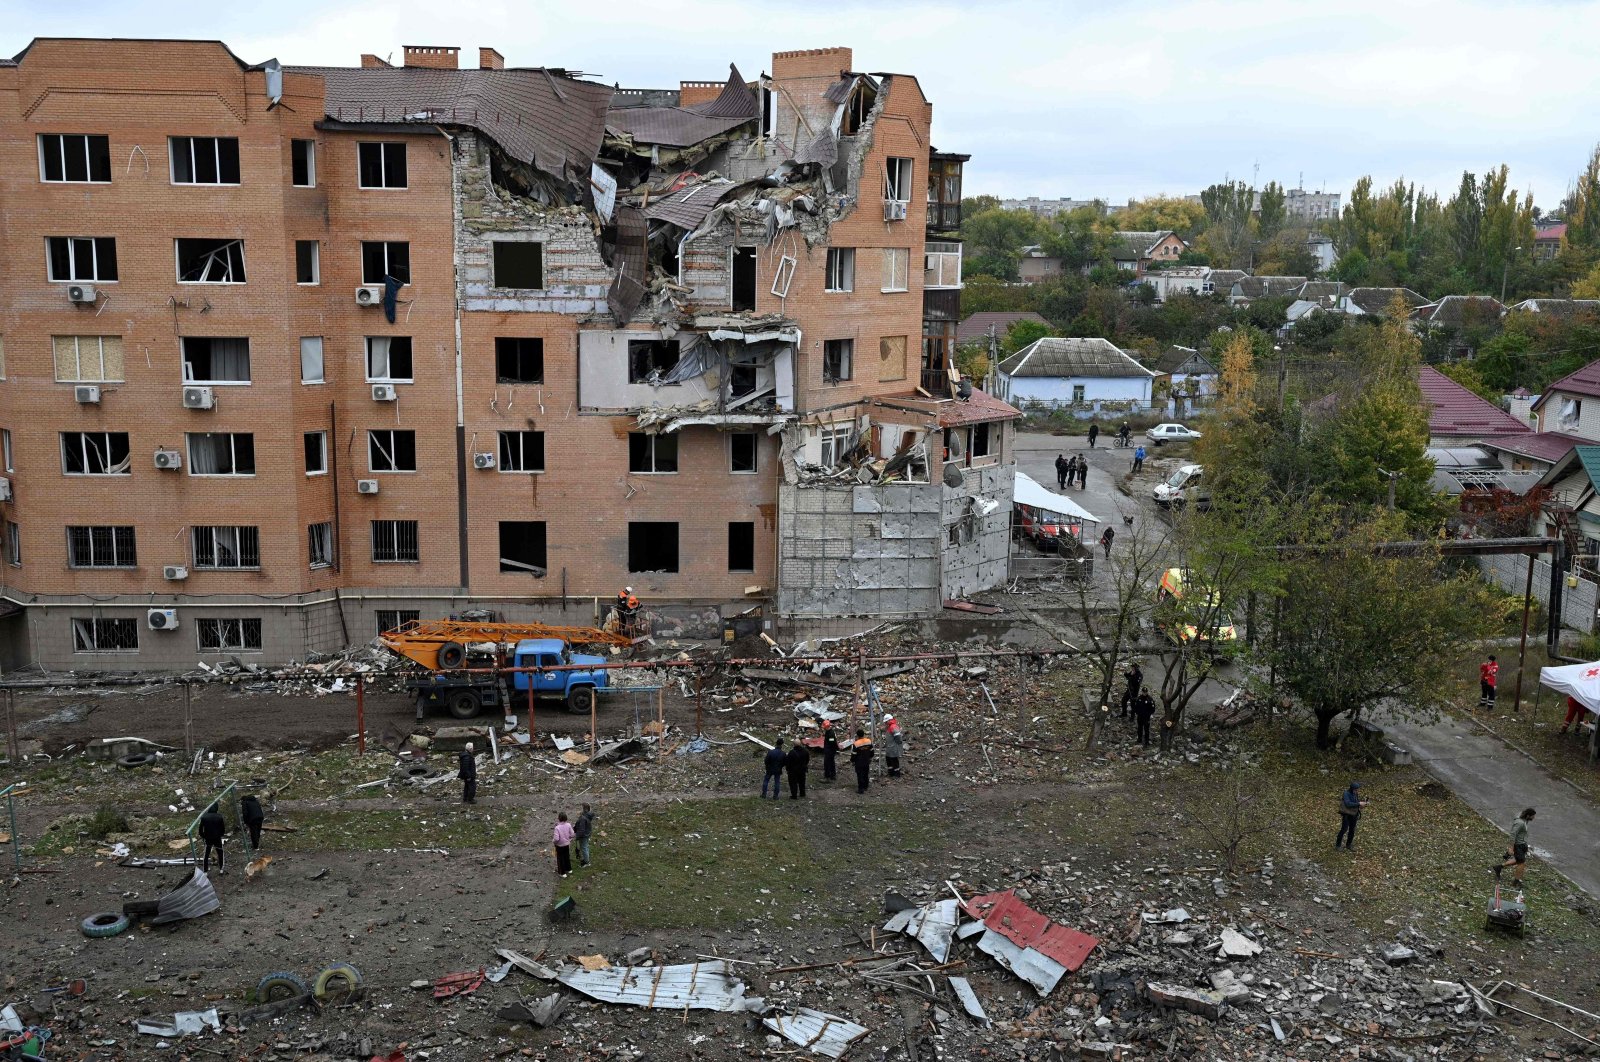 A damaged building is pictured after a rocket attack in Mykolaiv amid Russian invasion in Ukraine, Oct. 23, 2022. (AFP Photo)